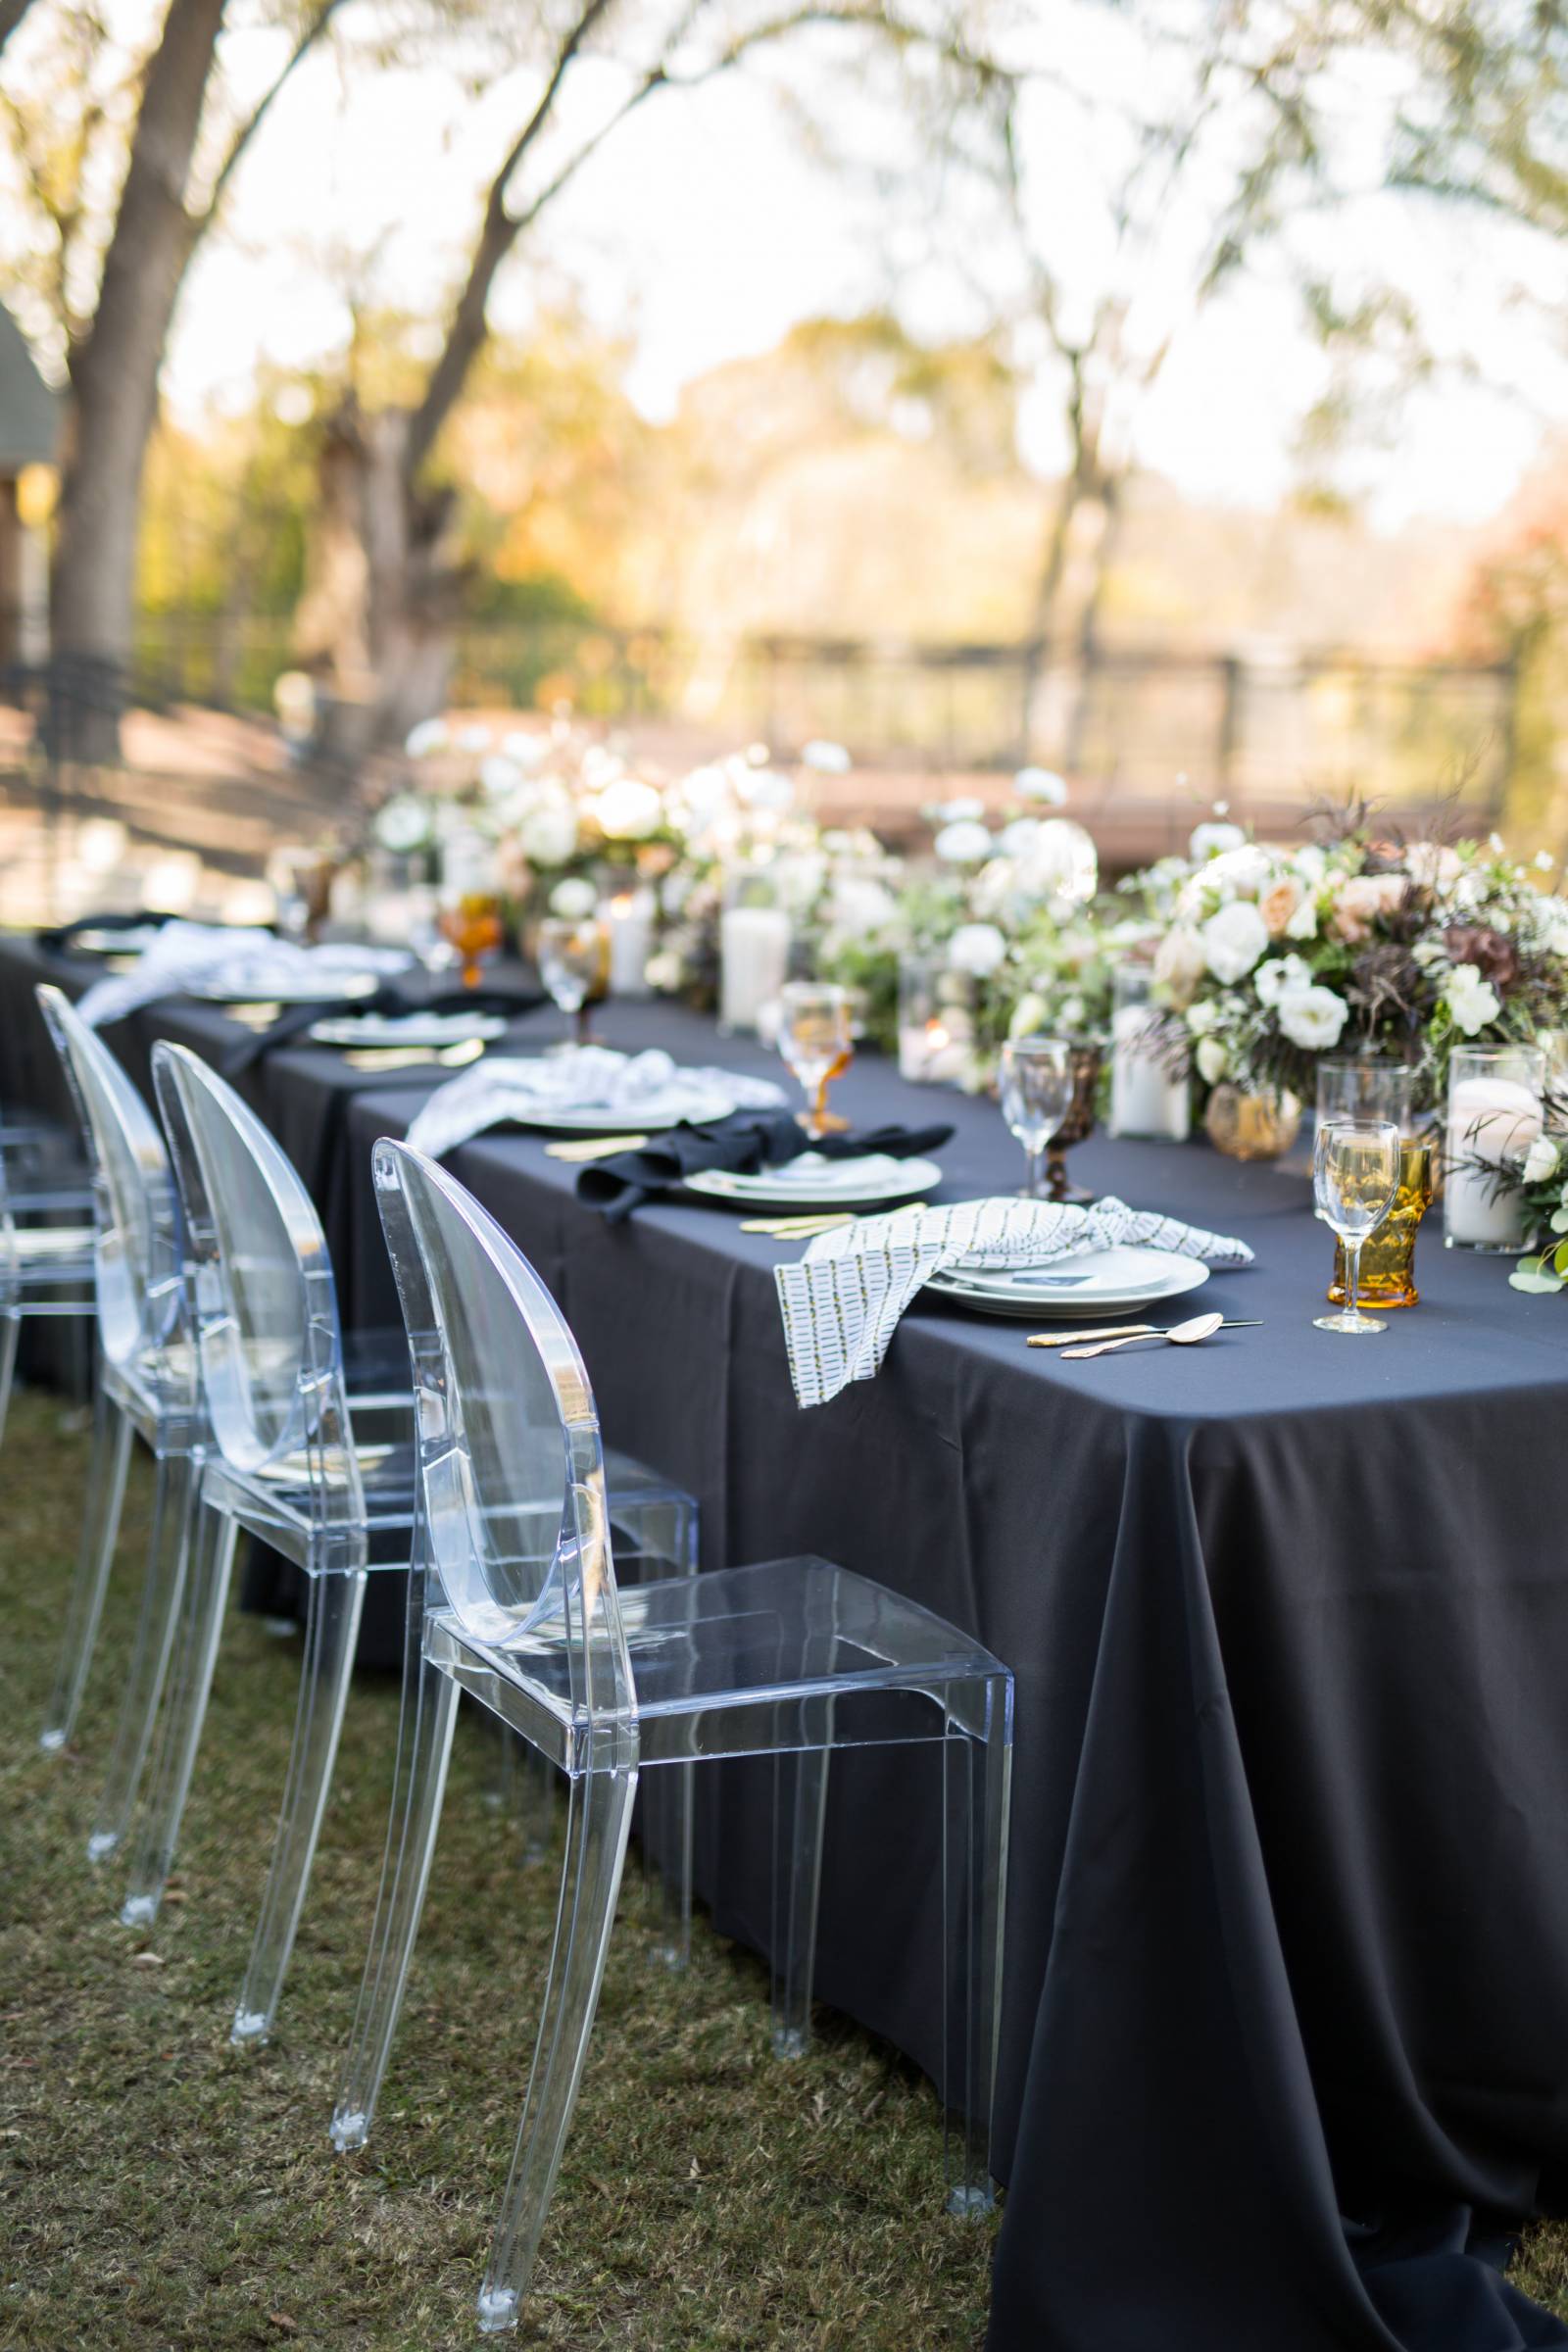 Table setting with black linen